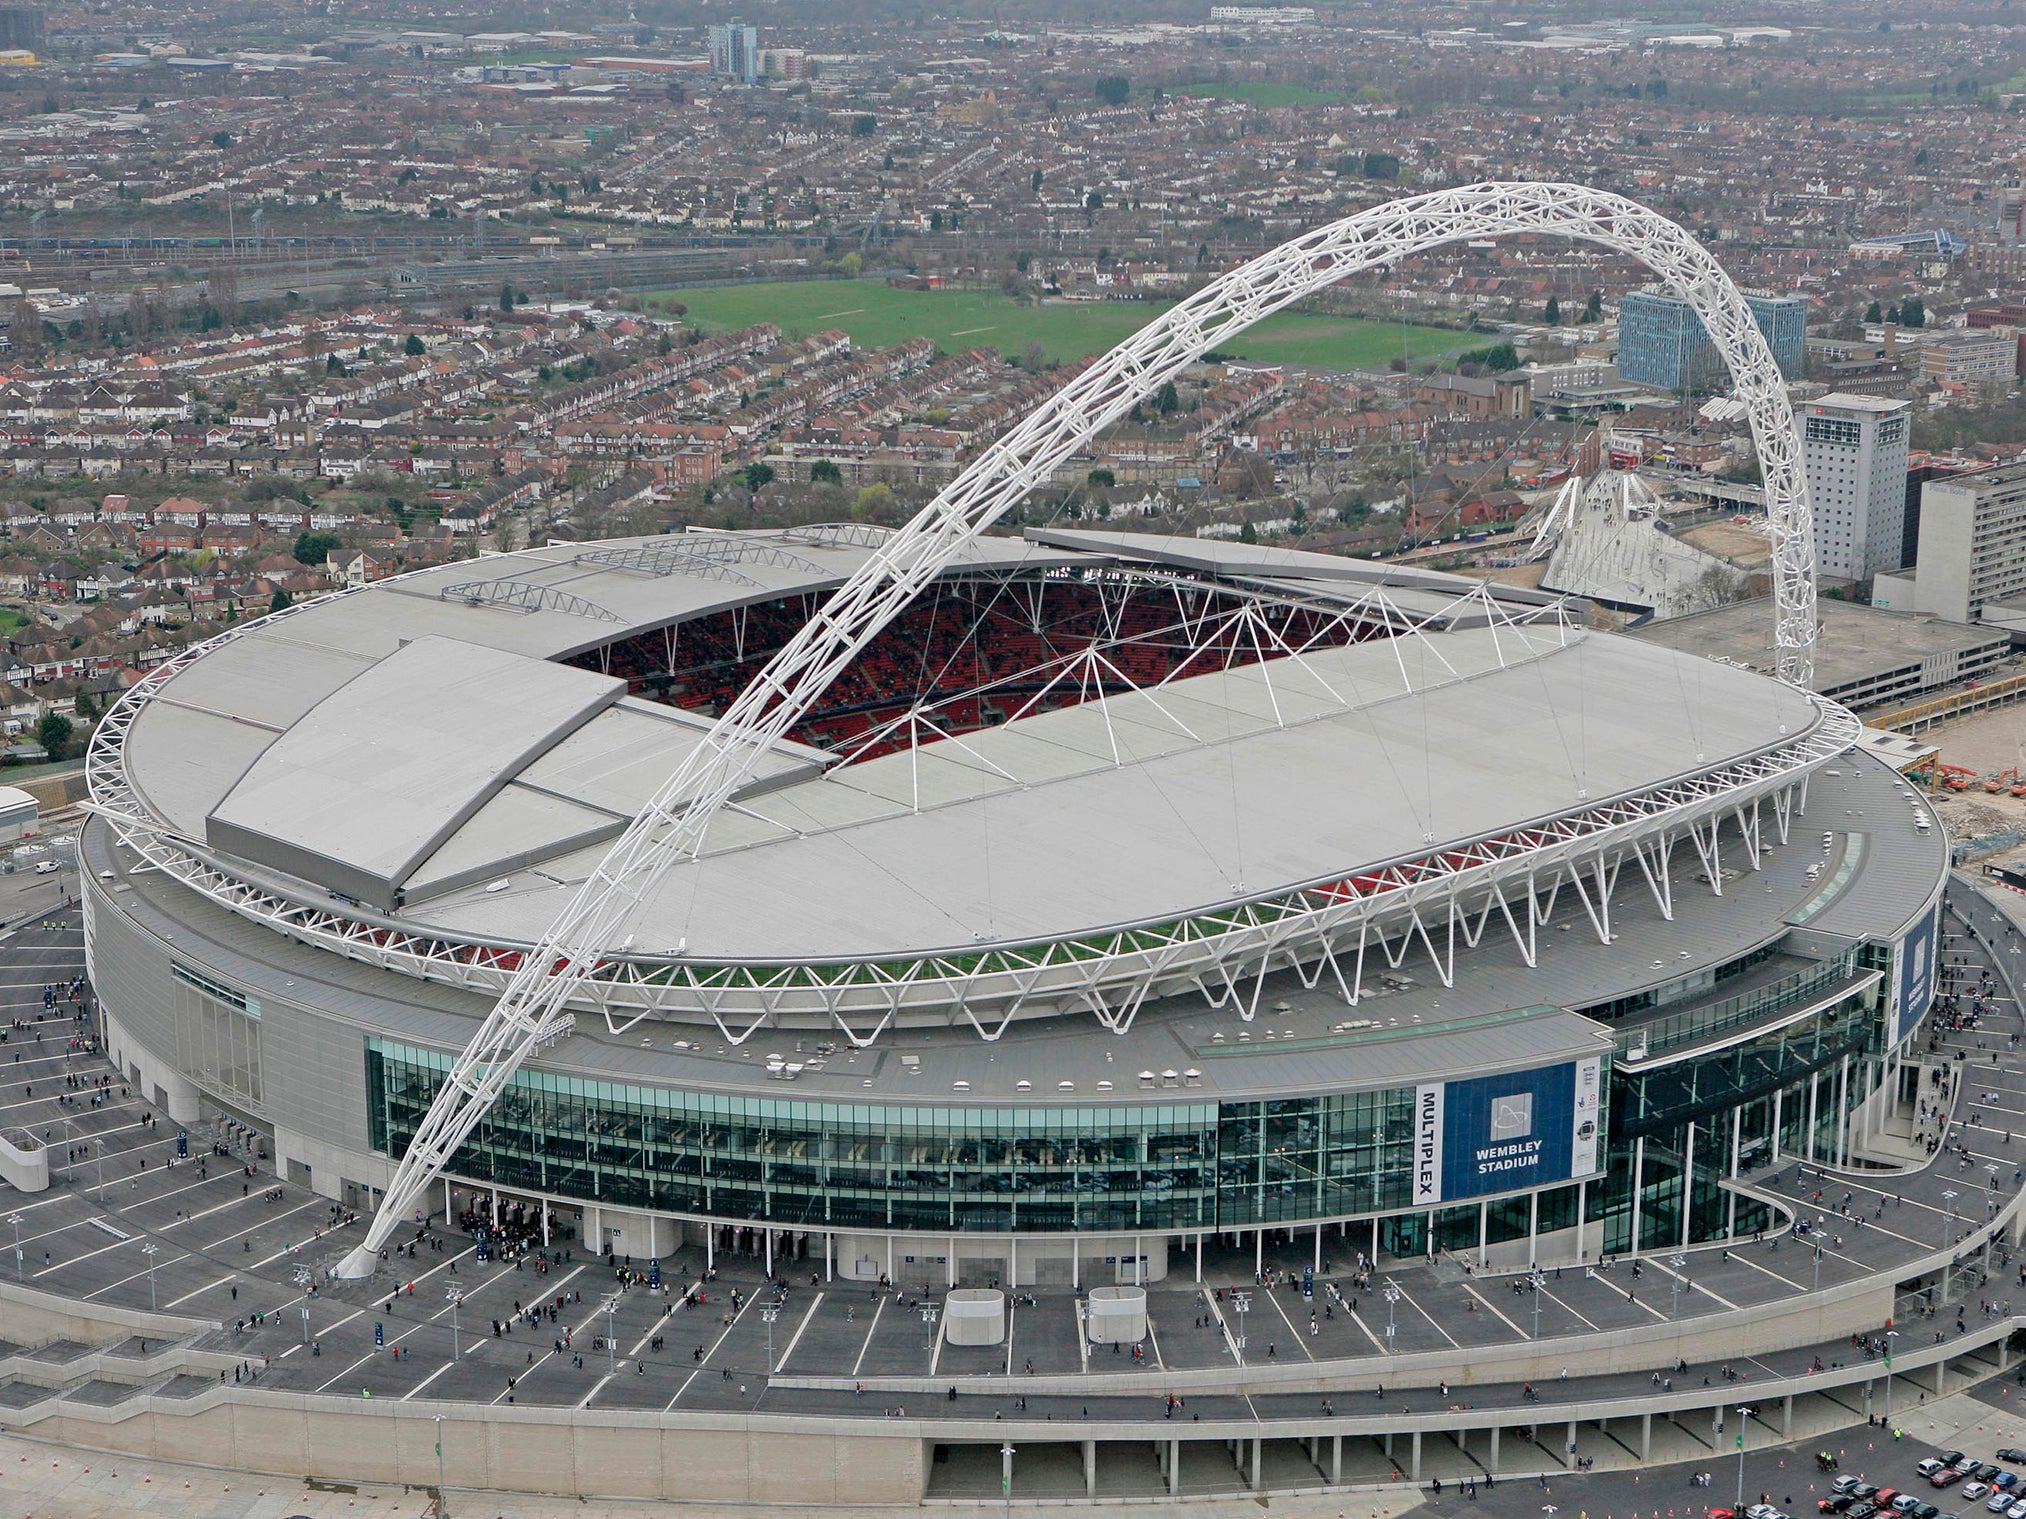 Wembley Stadium sale a step closer after FA board meeting | The Independent